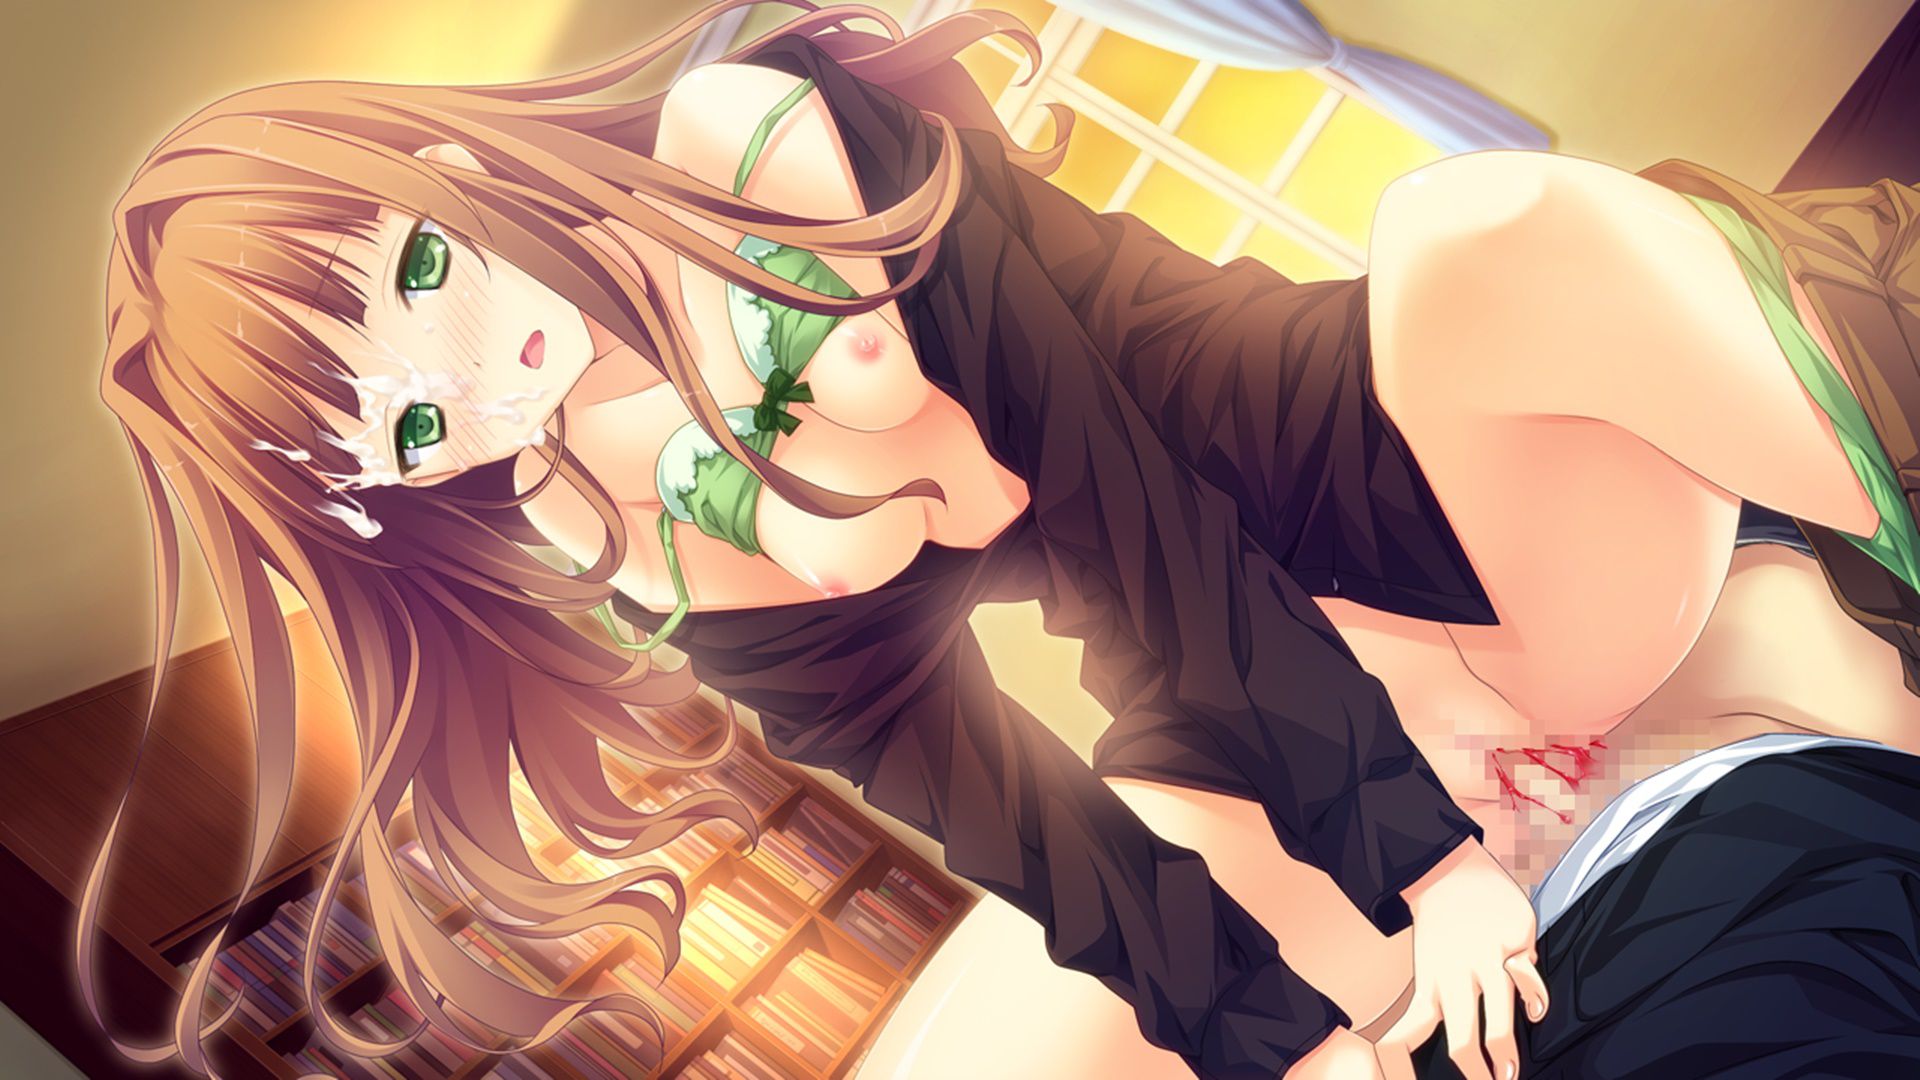 And me and her lover. [Under age 18 prohibited eroge CG] picture part 2 11